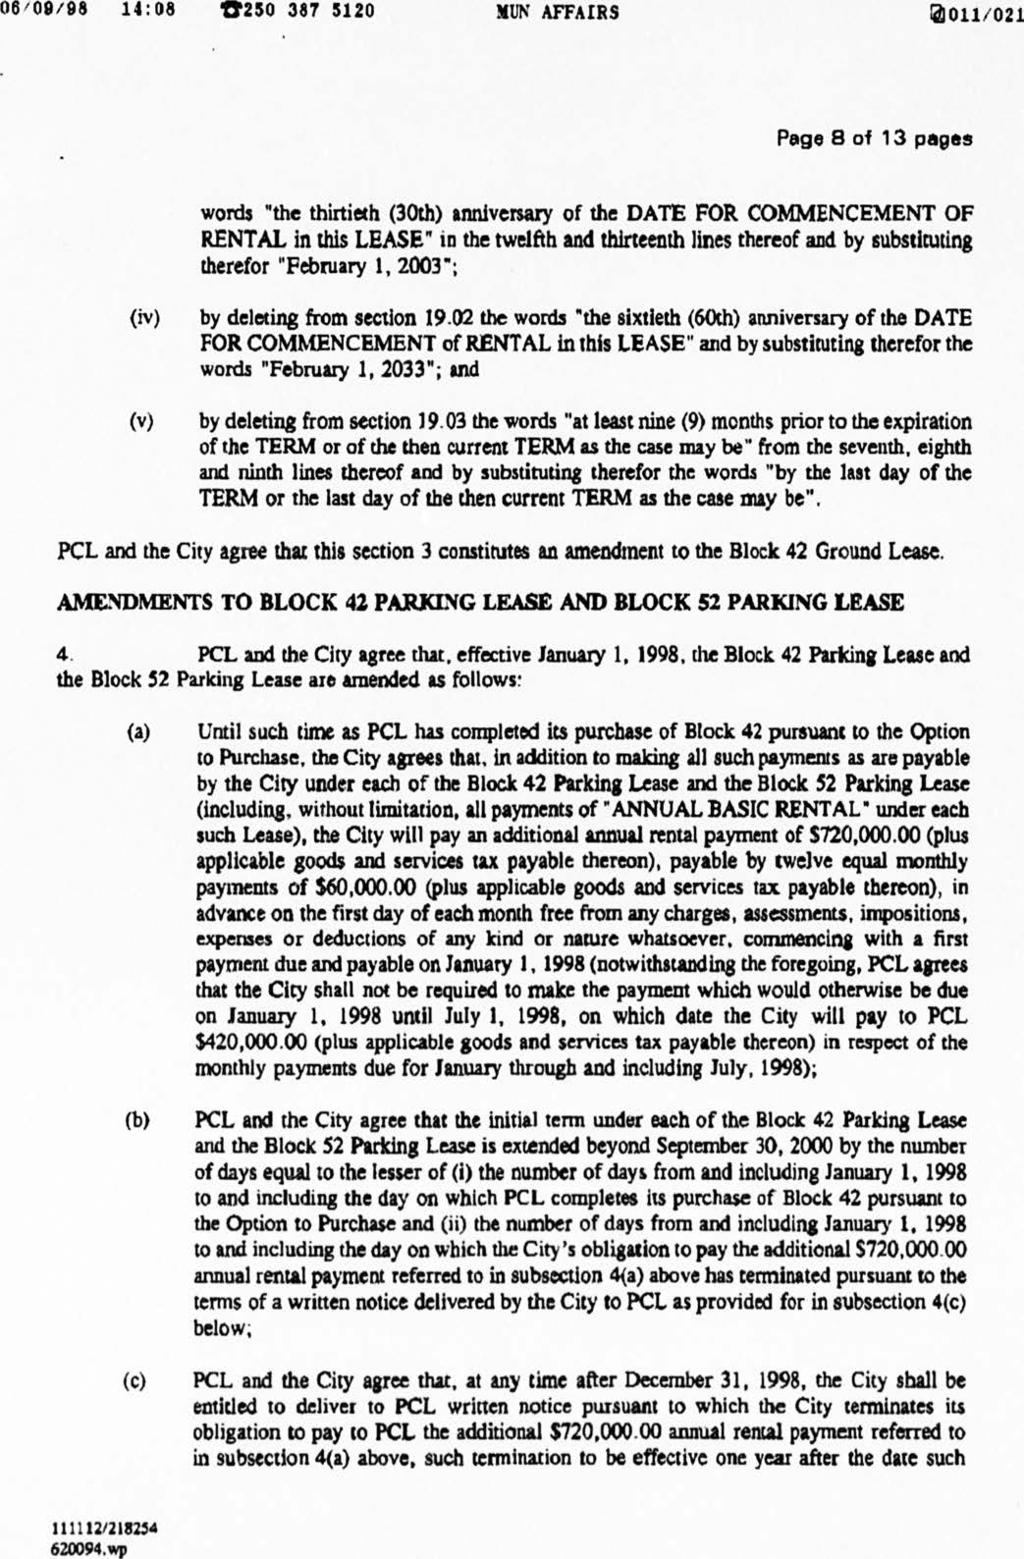 06'09/98 14:08 Tr250 387 5120 MUN AFFAIRS a011/021 Page 8 of 13 pages words "the thirtieth (30th) anniversary of the DATE FOR COMMENCEMENT OF RENTAL in this LEASE" in the twelfth and thirteenth lines